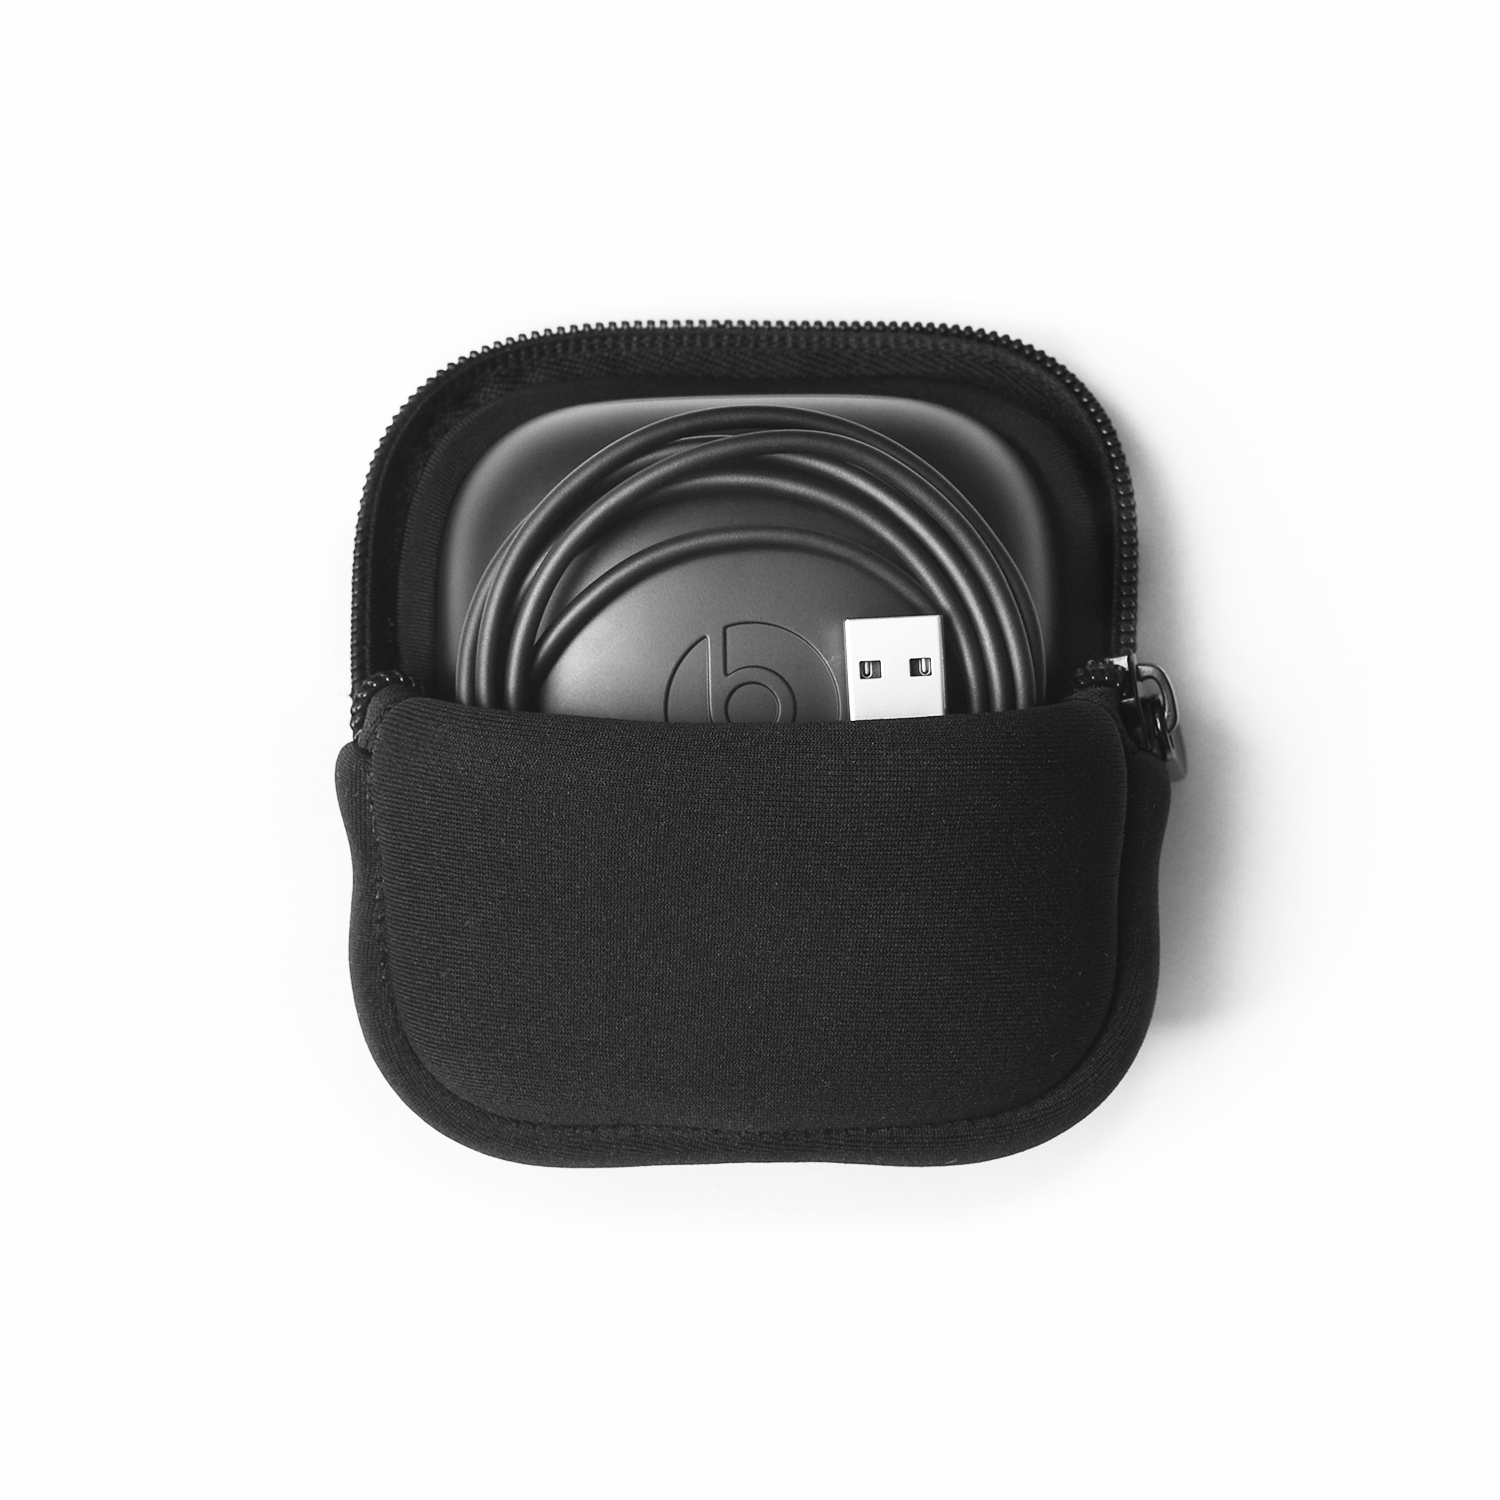 Bakeey-Earphone-Storage-Bag-Wireless-bluetooth-Headset-Protective-Carrying-Case-Dustproof-Portable-S-1800555-2